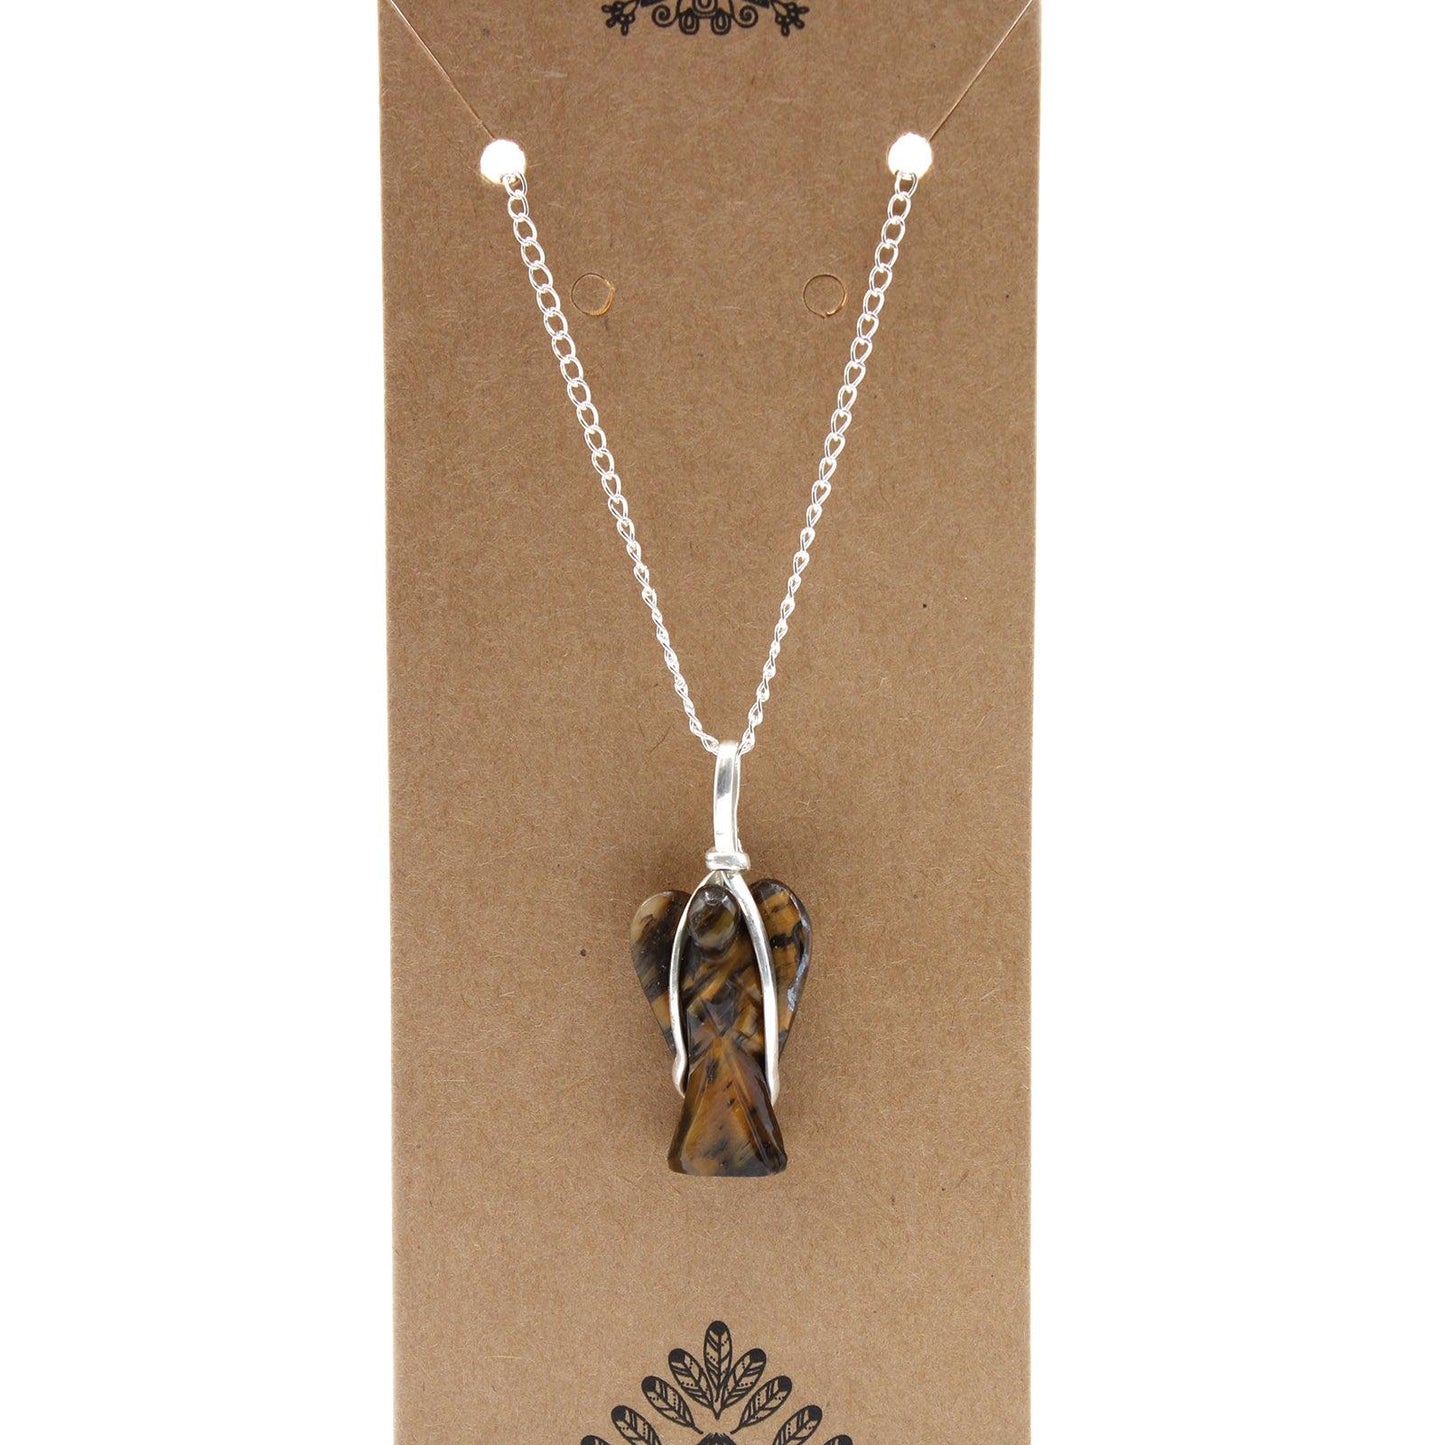 Gemstone Guardian Angel Pendant Necklace - Tigers Eye - Free Pouch